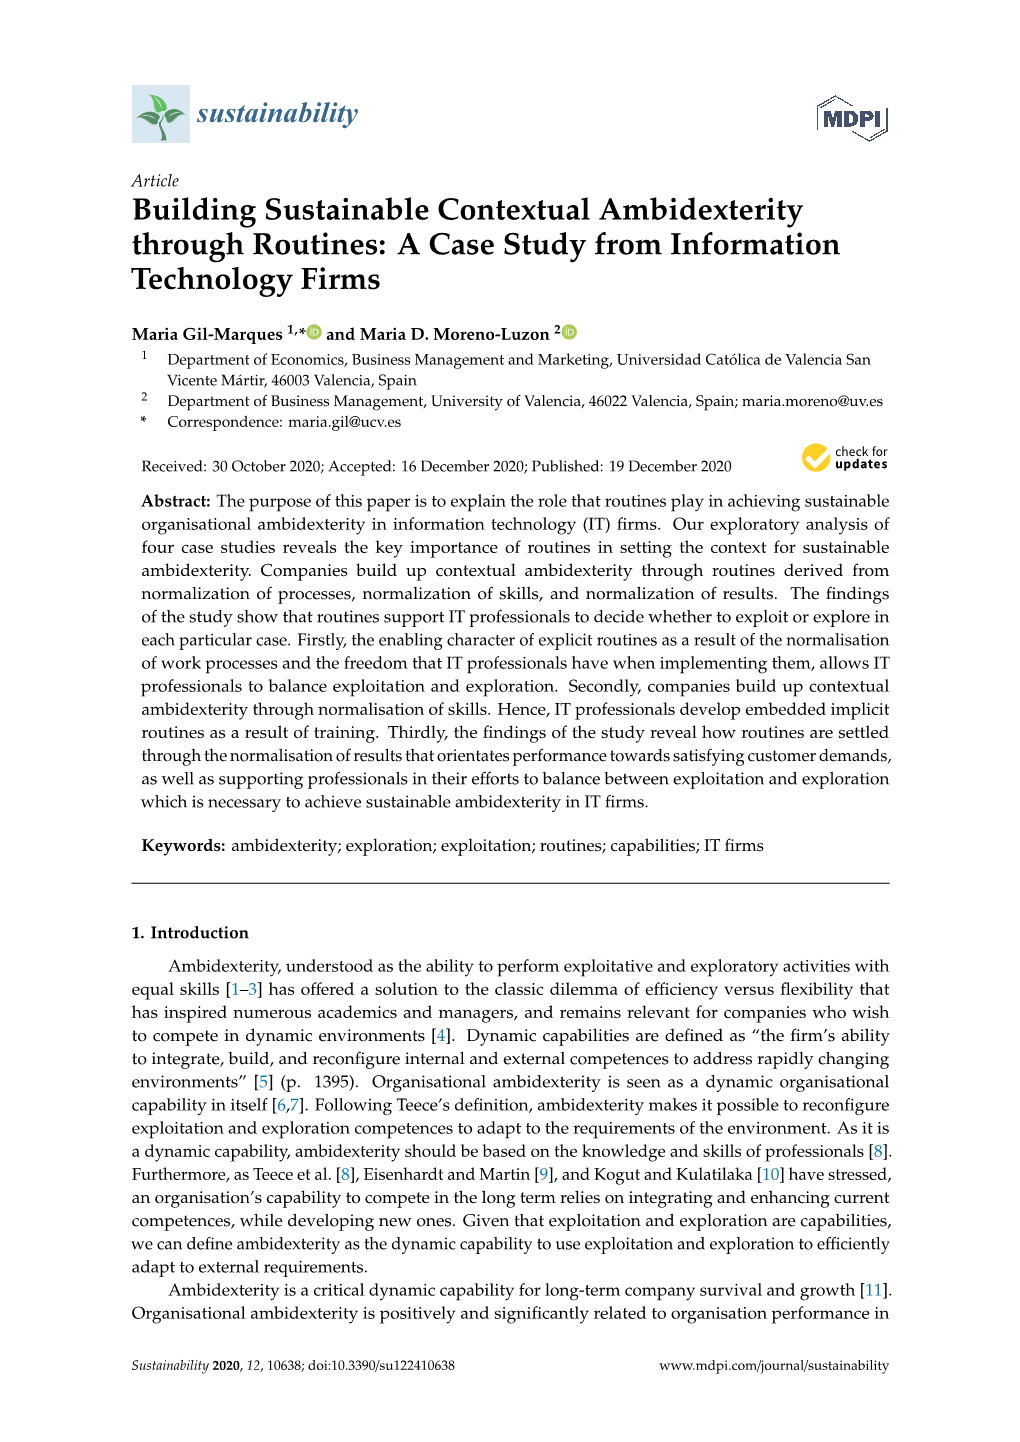 Building Sustainable Contextual Ambidexterity Through Routines: a Case Study from Information Technology Firms